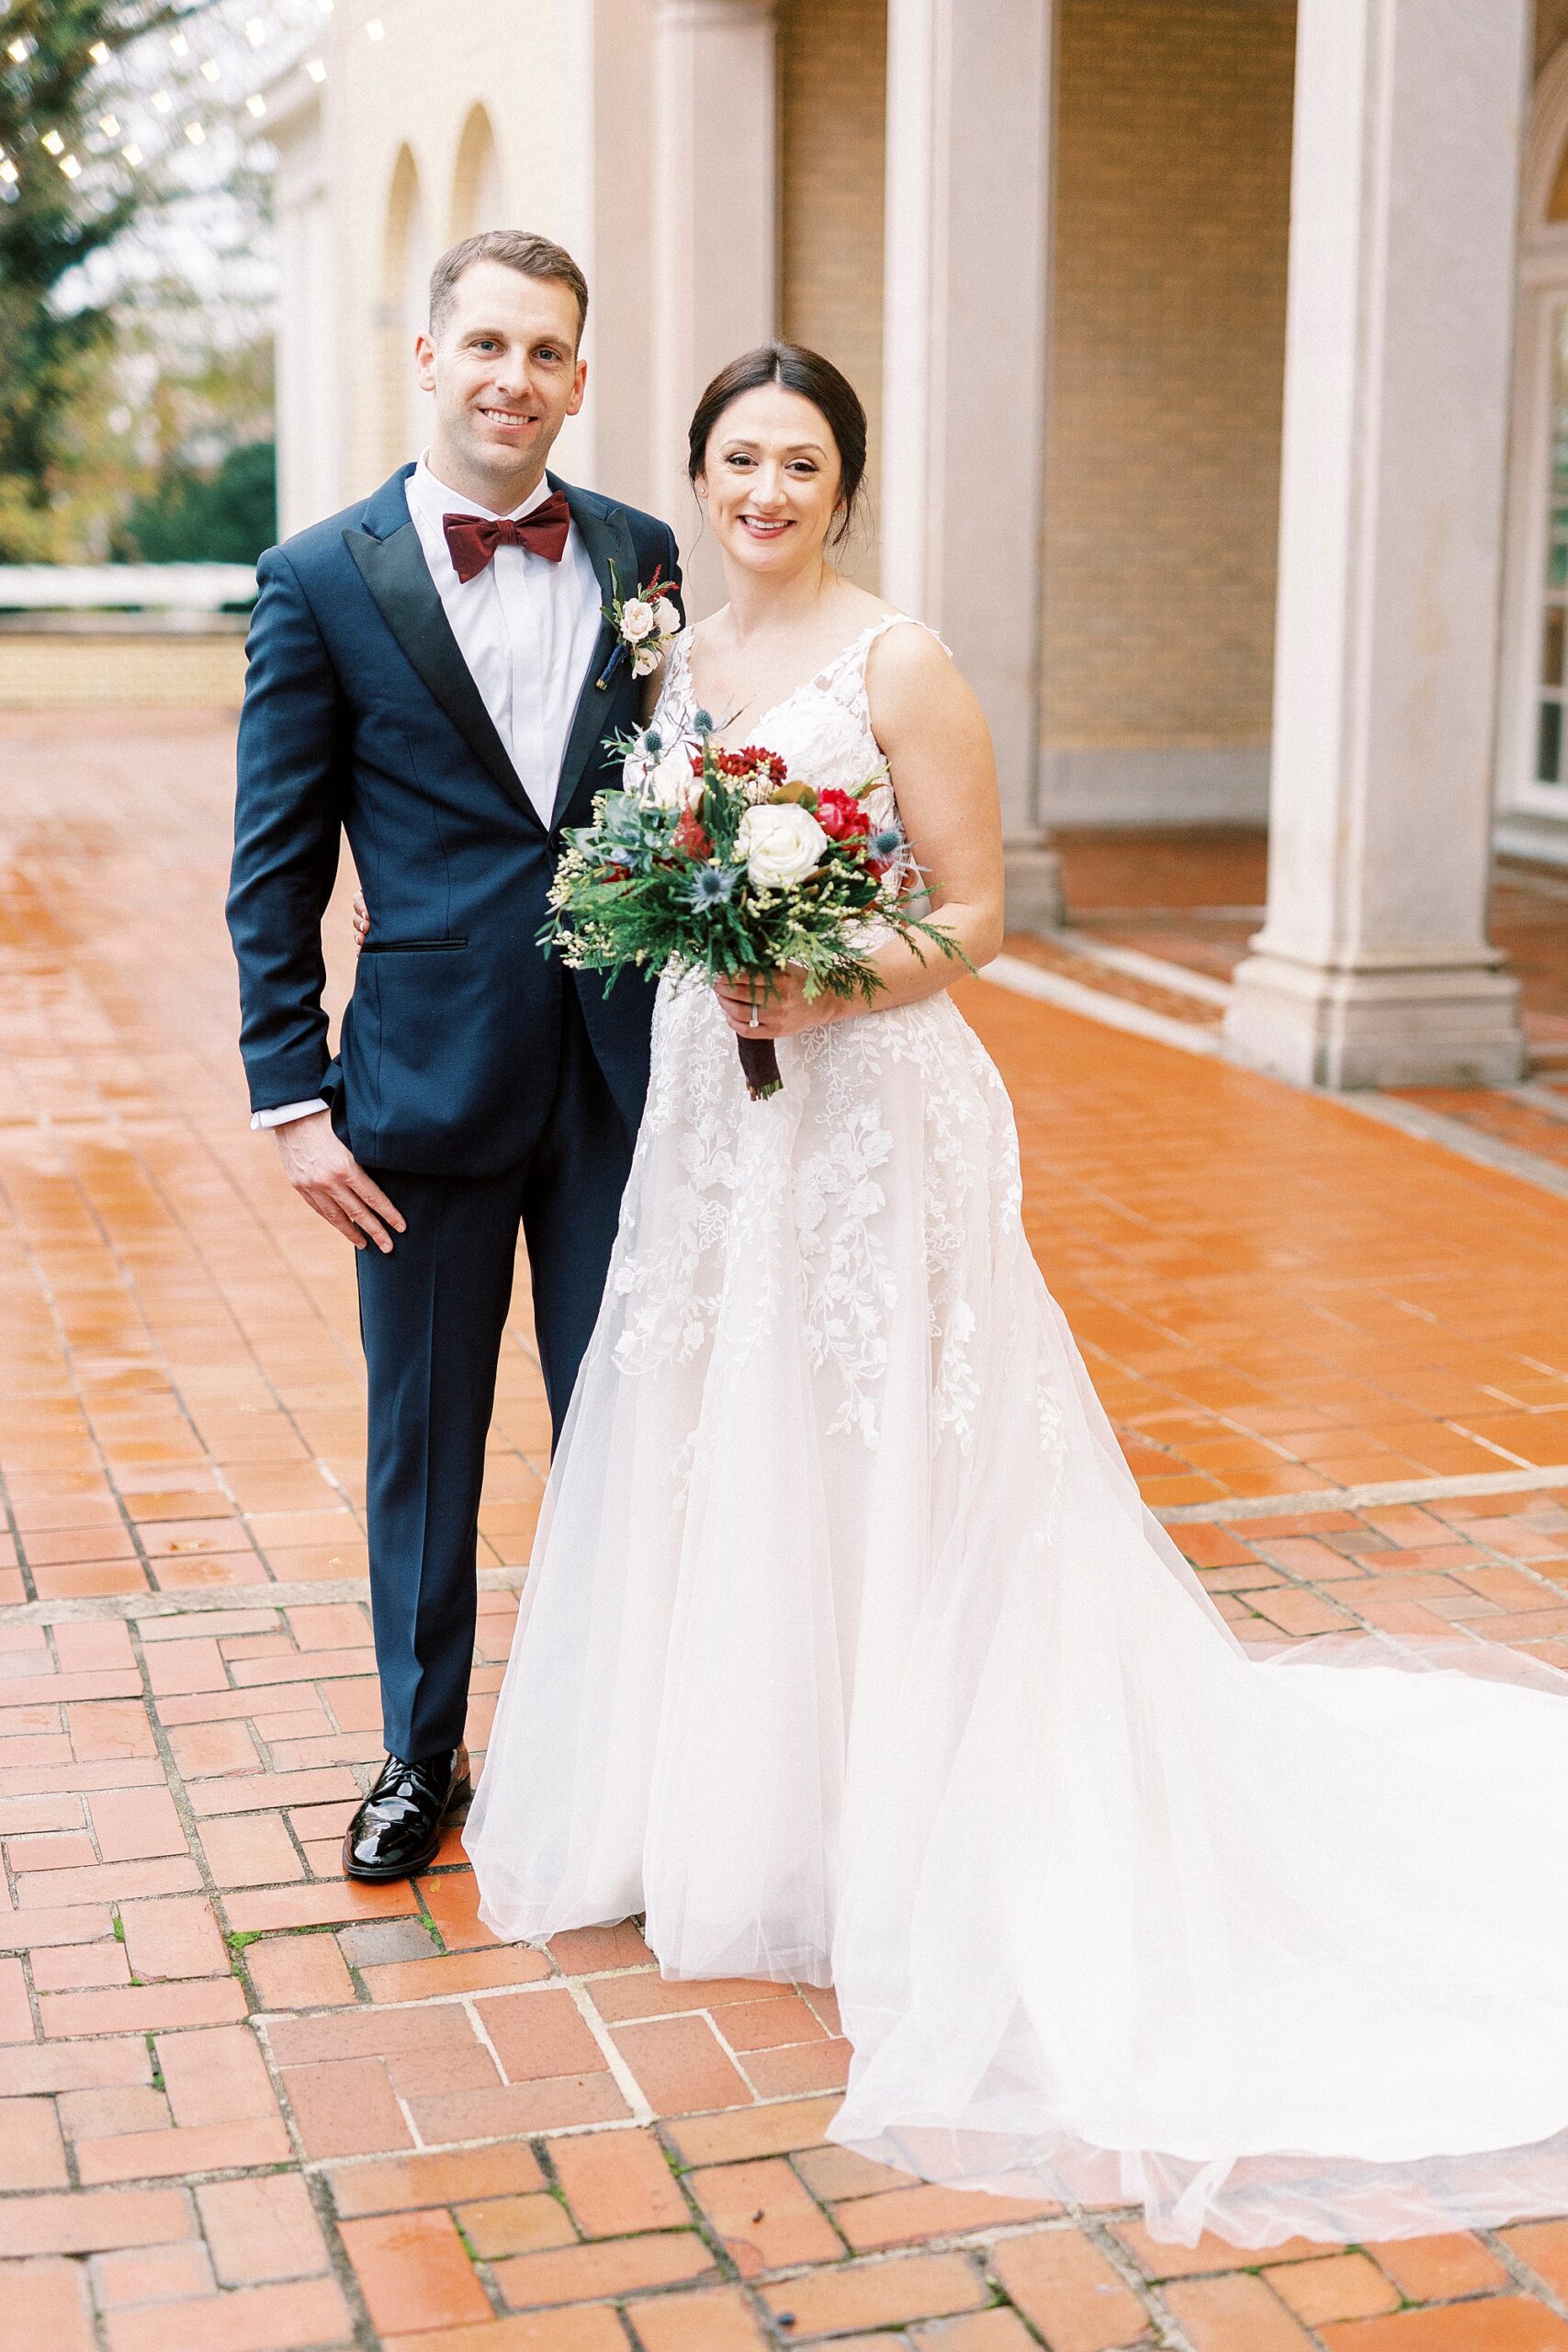 newlyweds stand together on rain covered brick patio